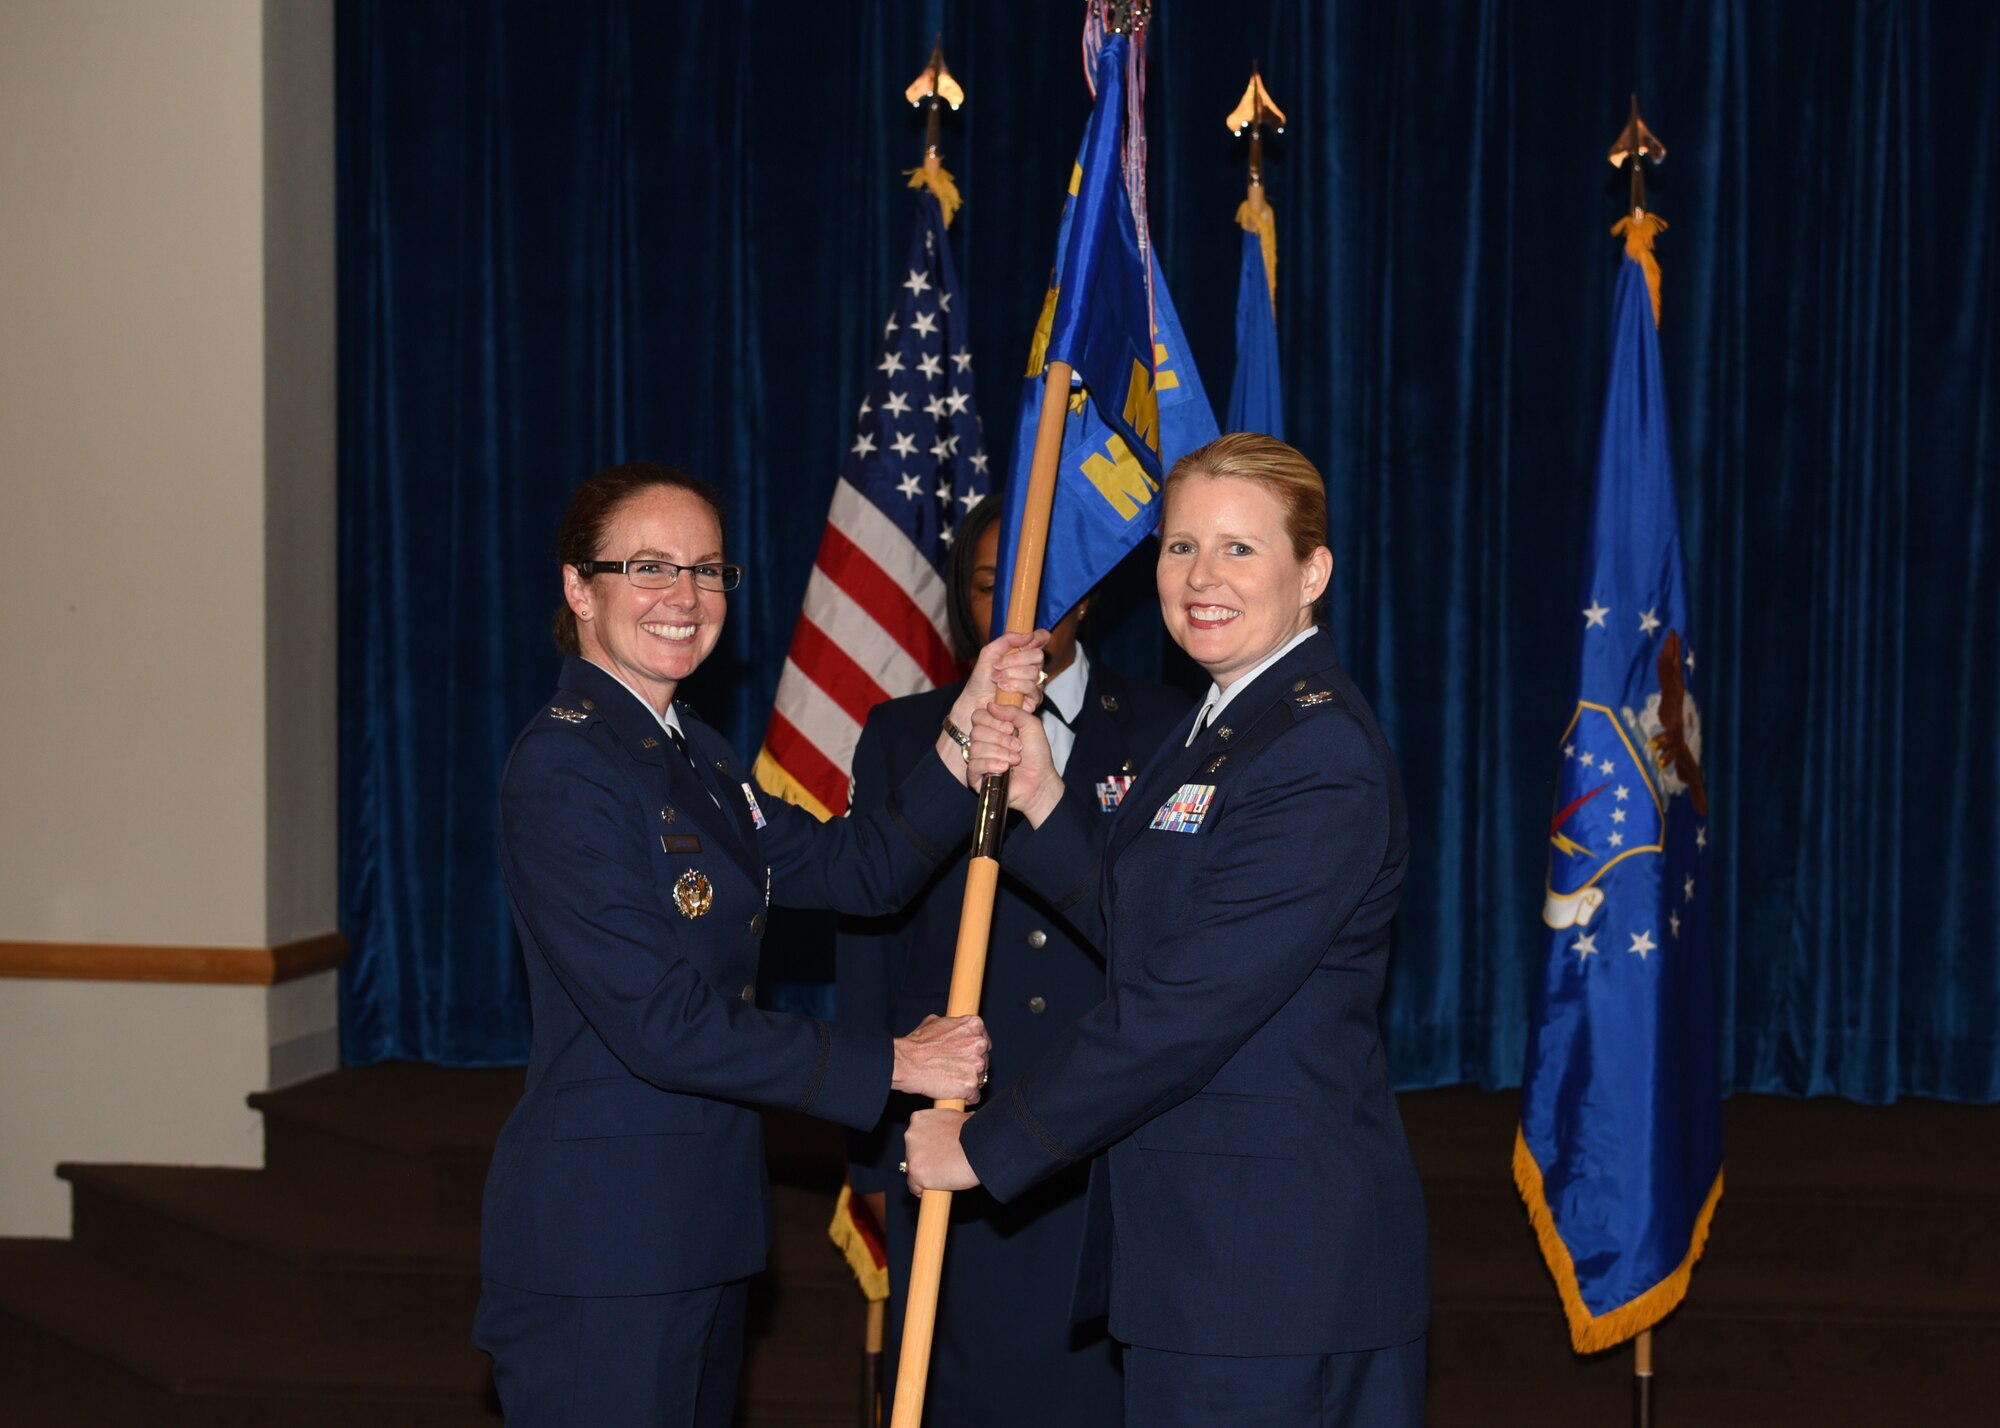 Colonel Stacy Jo Huser, 90th Missile Wing commander, passes the guidon to Col. Kristine Hackett, 90th Medical Group commander, during the 90th MDG change of command ceremony June 29, 2018, at F.E. Warren Air Force Base, Wyo. The ceremony signified the transition of command from Col. Cherron Galluzzo. (U.S. Air Force photo by Airman 1st Class Braydon Williams)